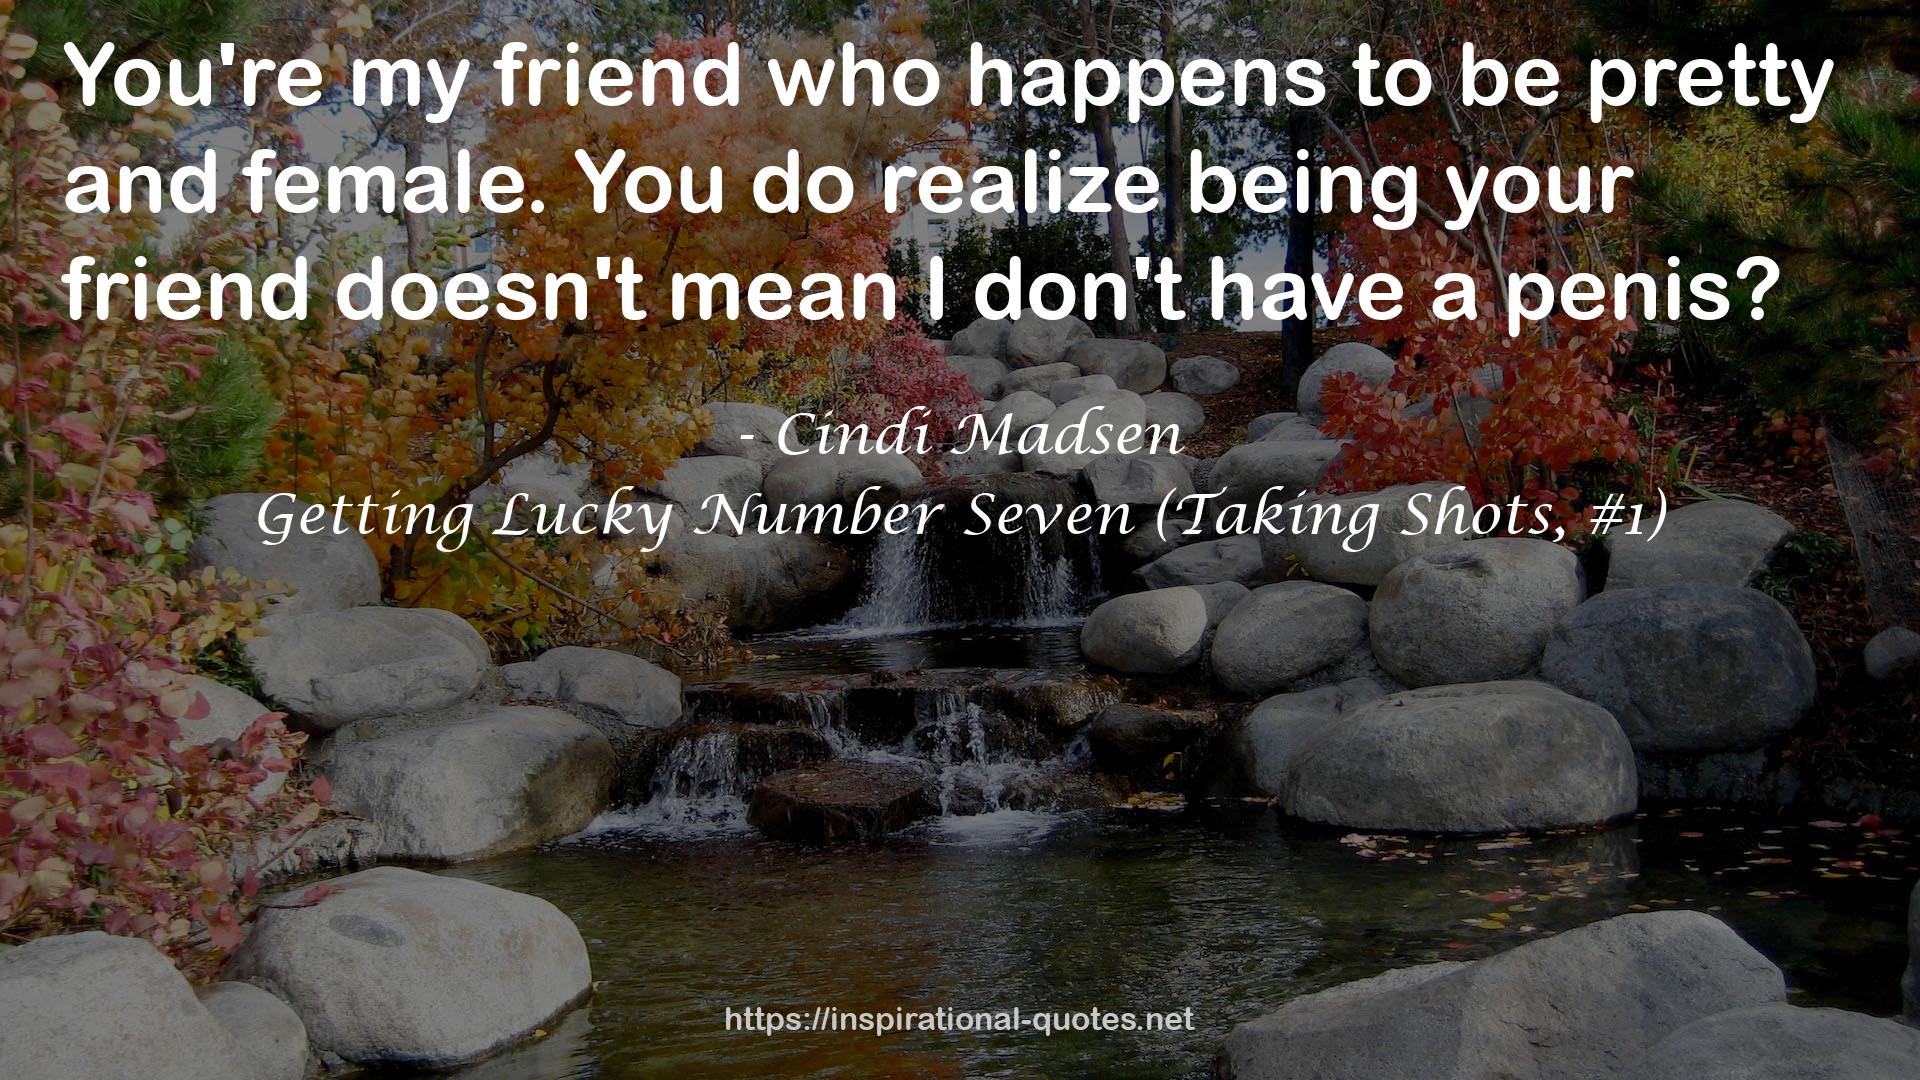 Getting Lucky Number Seven (Taking Shots, #1) QUOTES